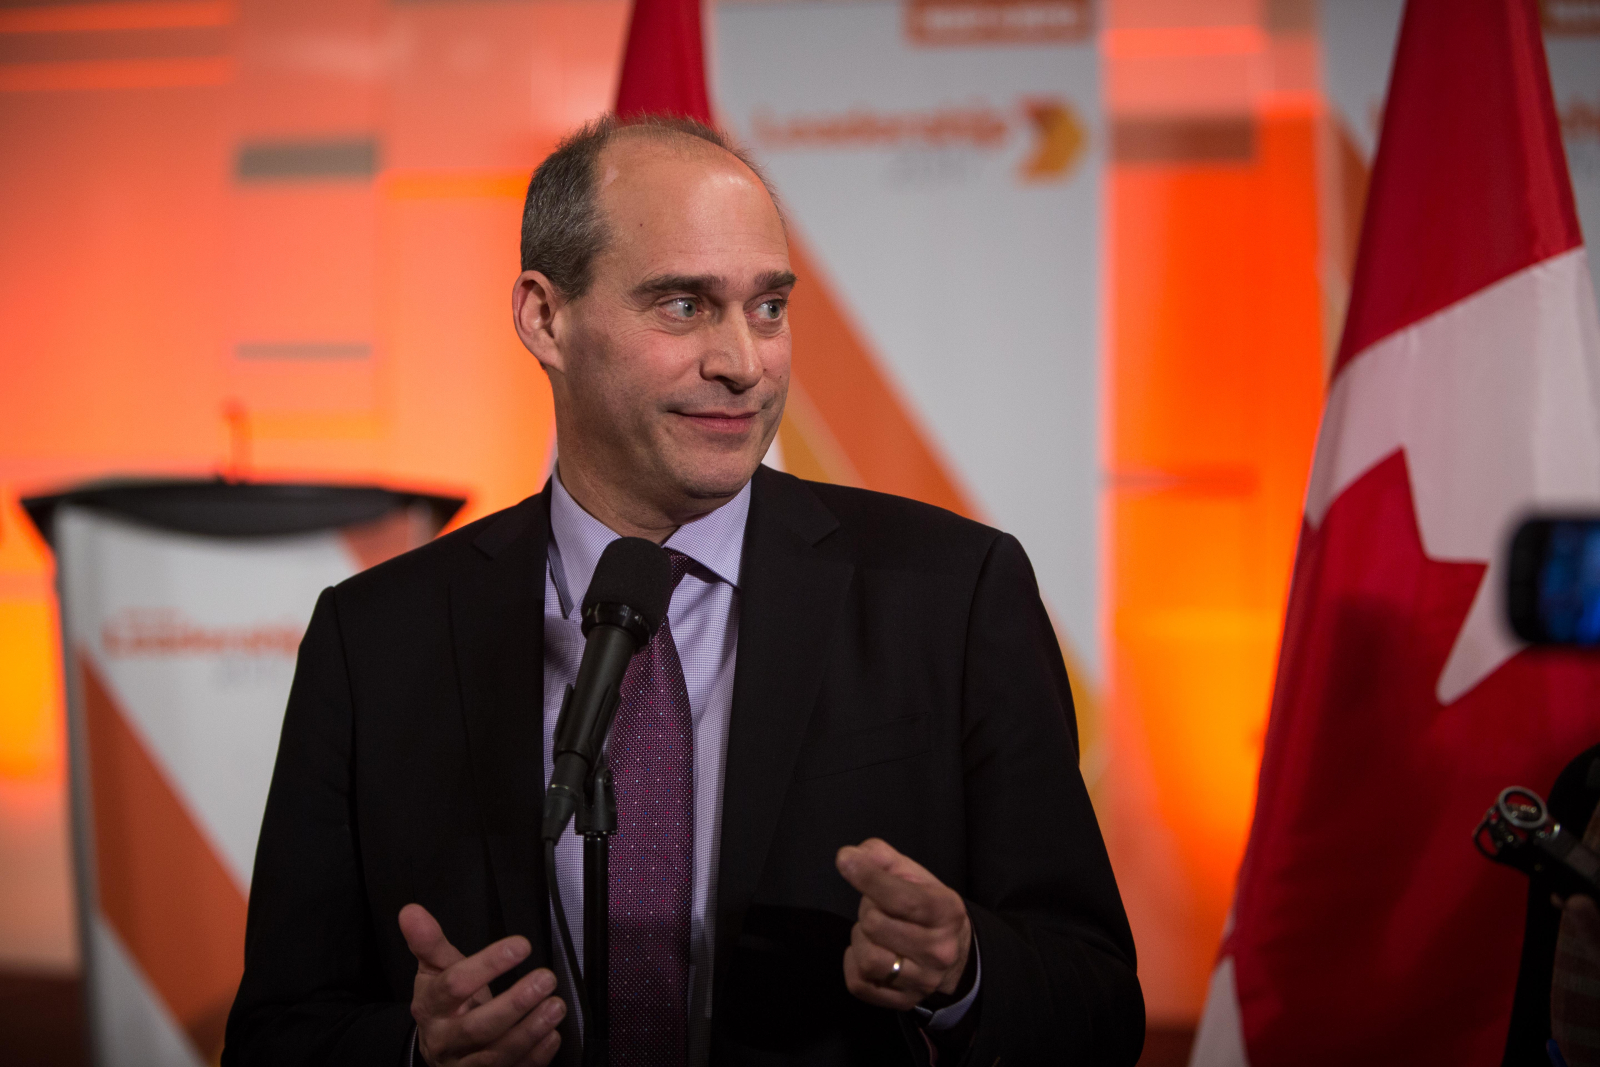 NDP leadership hopeful Guy Caron speaks to reporters in Ottawa on March 12, 2017.